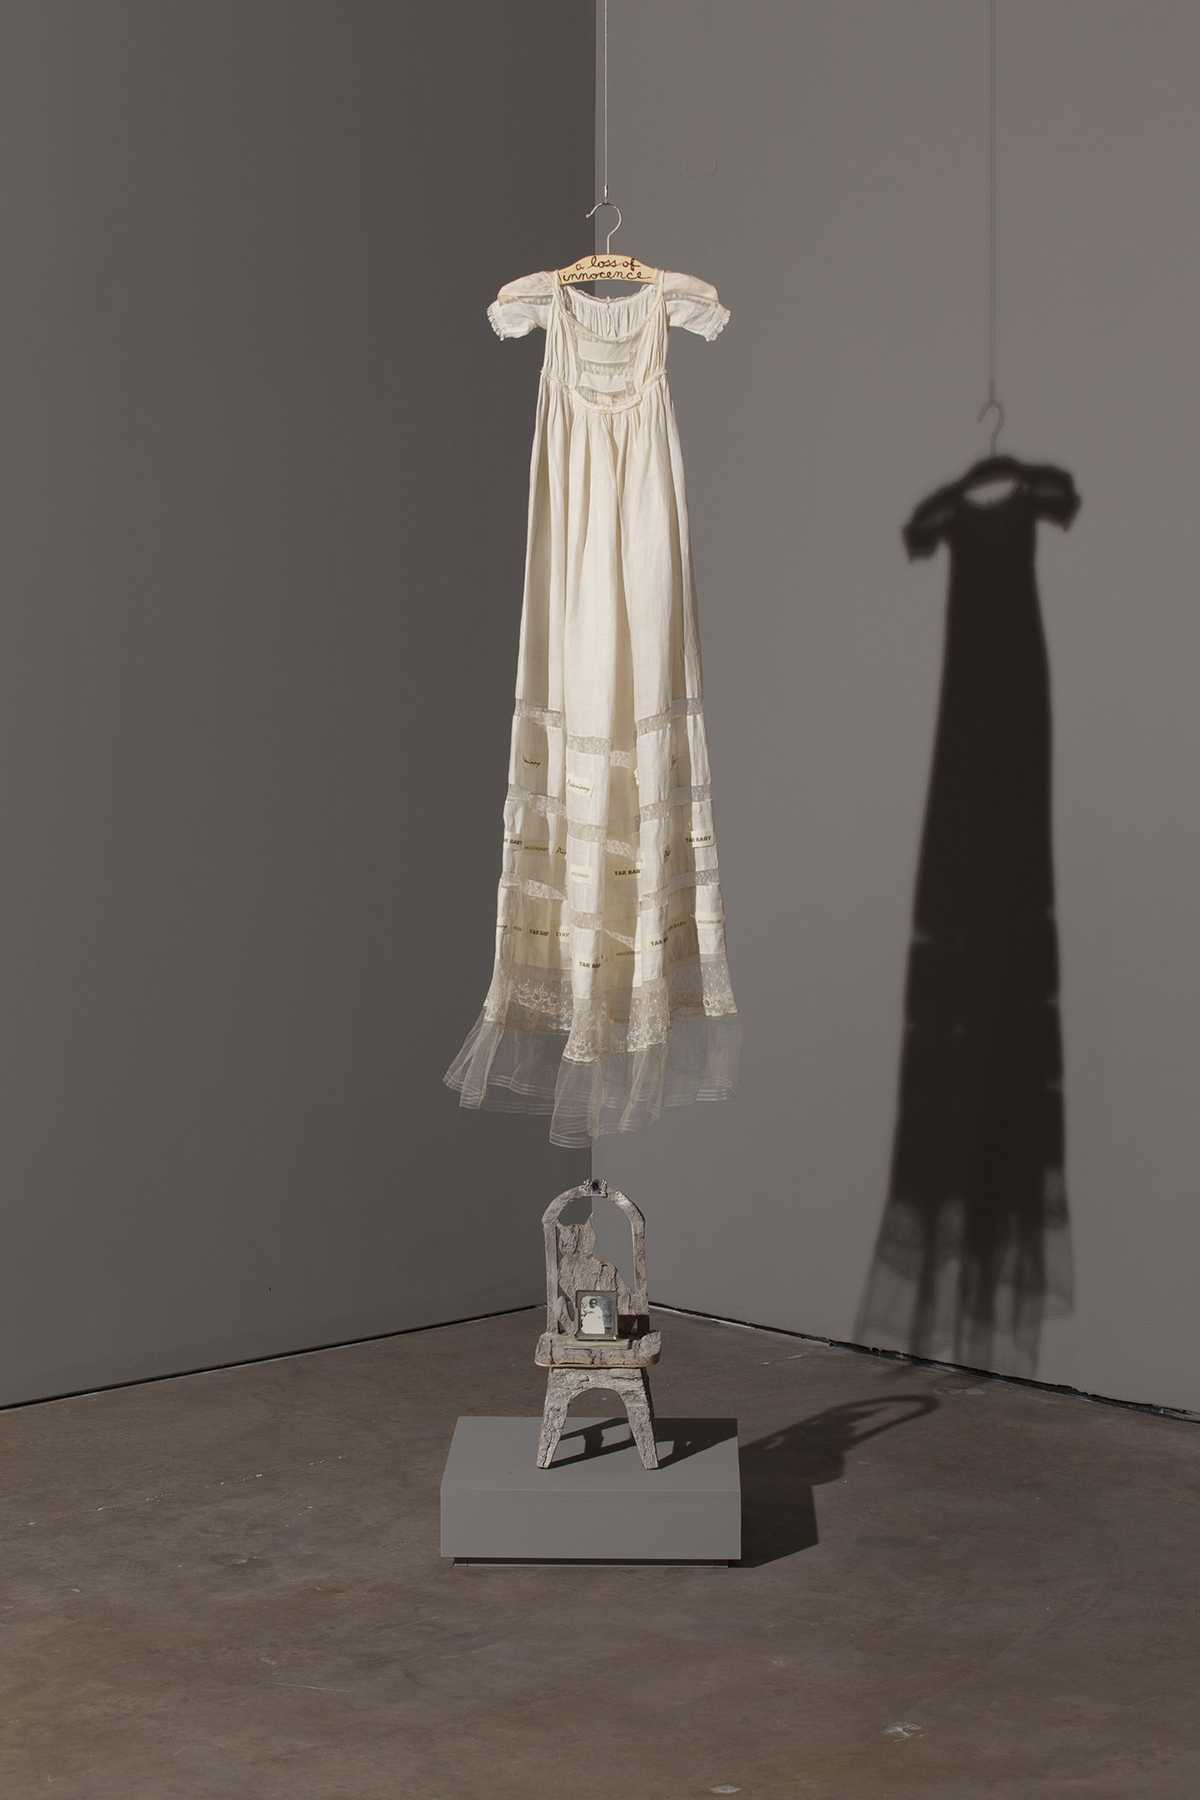 Dress hanging from the ceiling installation